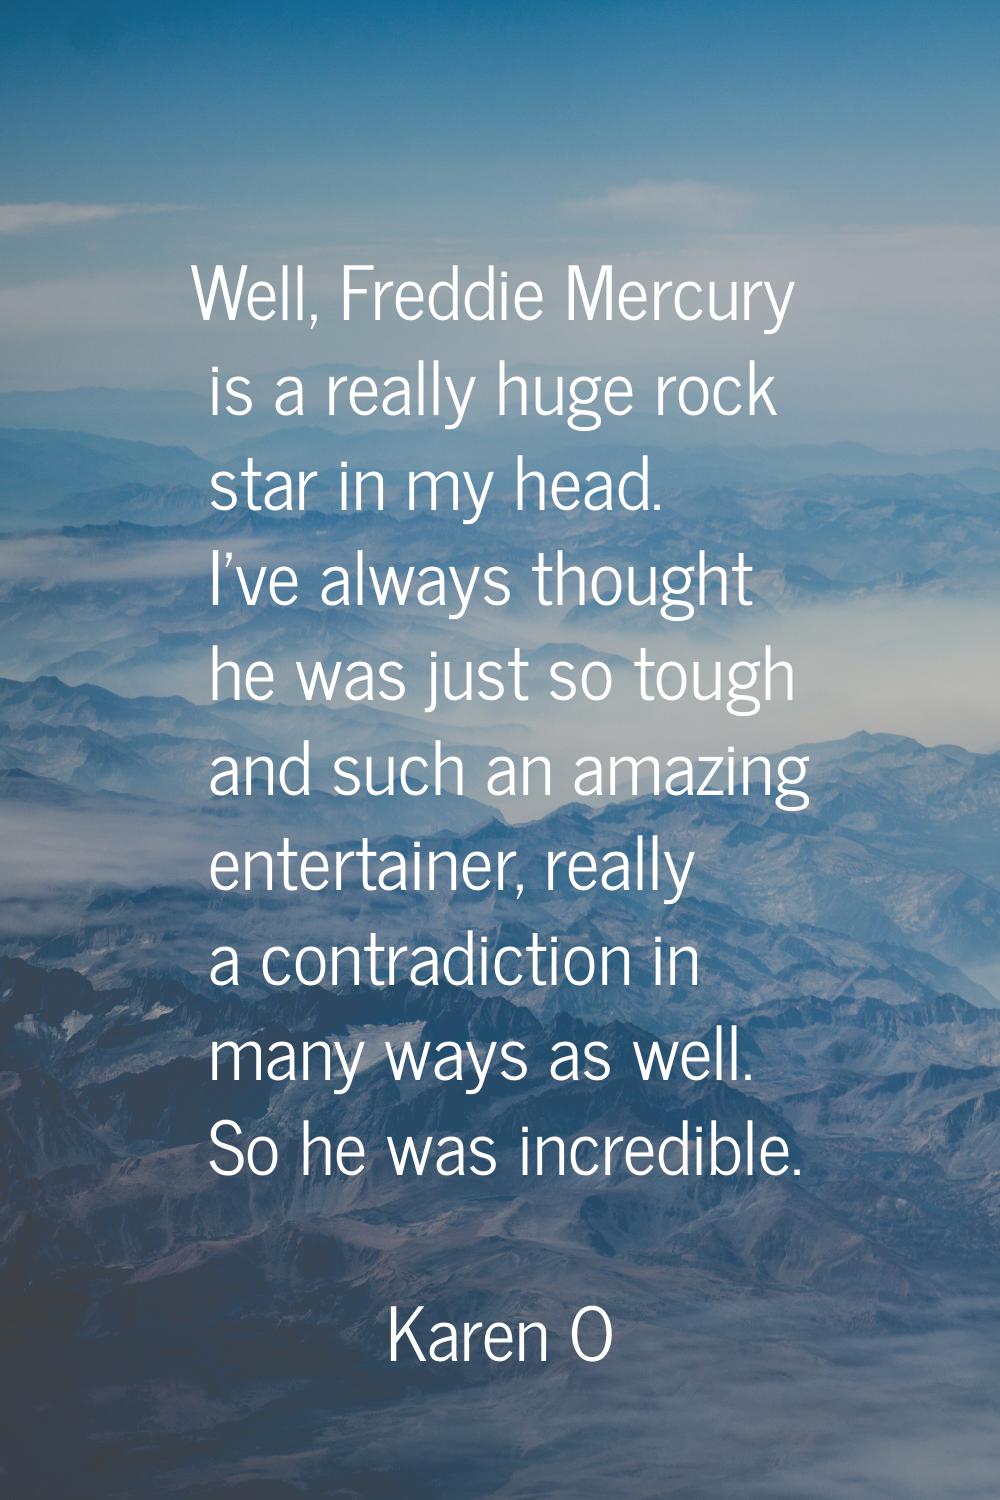 Well, Freddie Mercury is a really huge rock star in my head. I've always thought he was just so tou